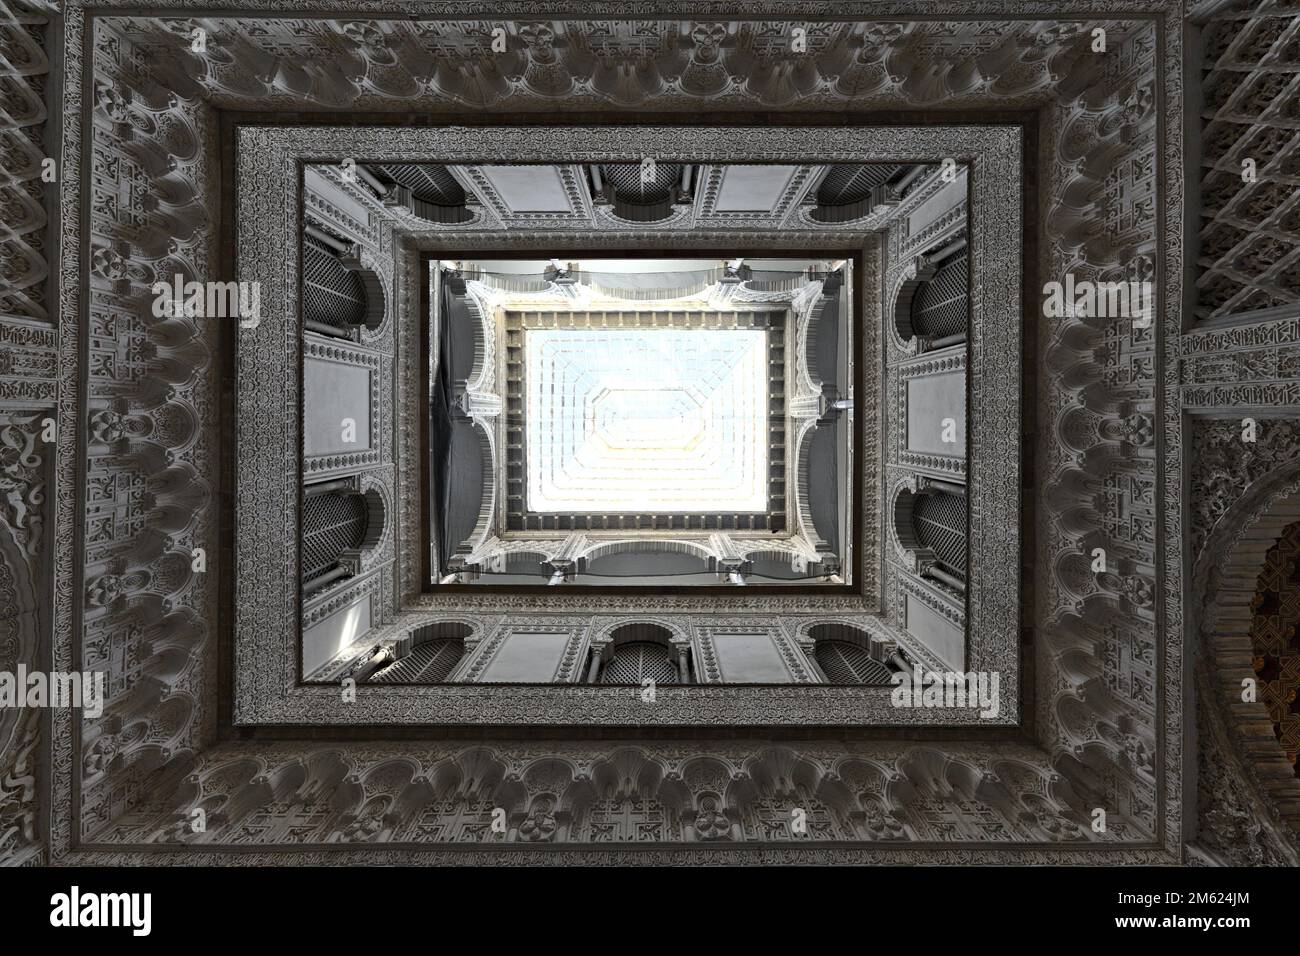 Creative shot at the ceiling of the Alkazar of Seville Stock Photo